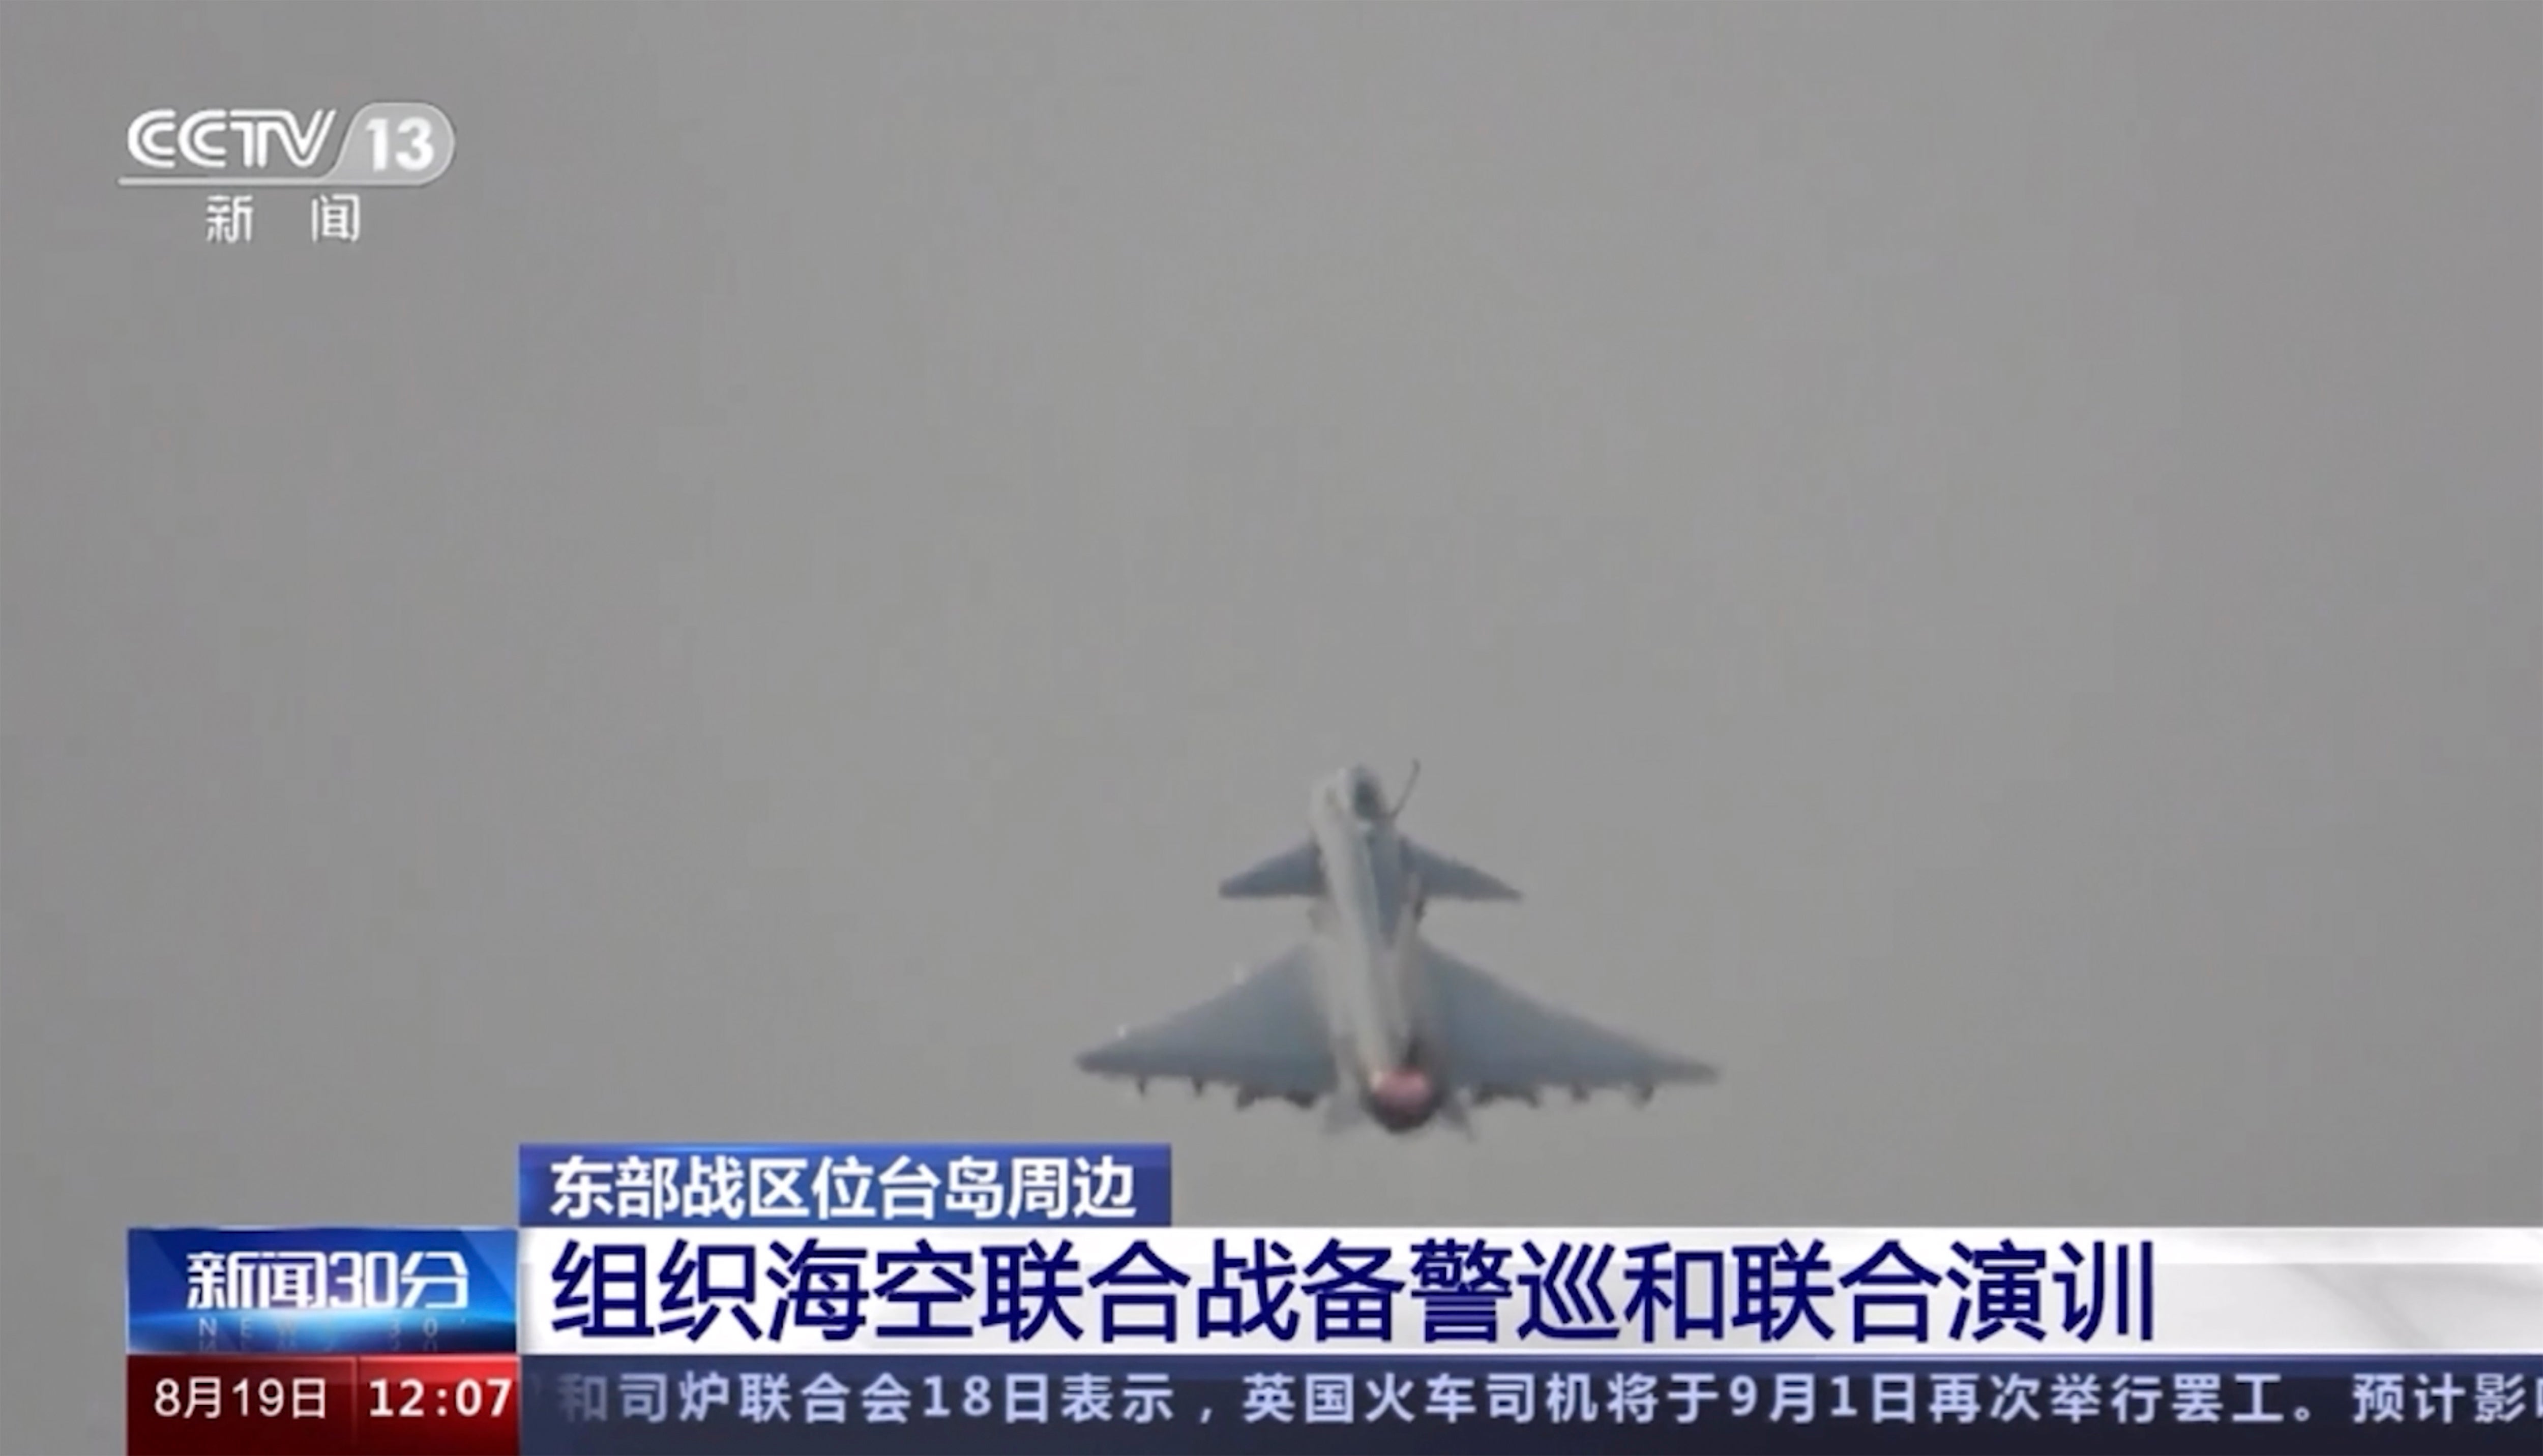 A Chinese fighter jet takes off from China for drills on Saturday